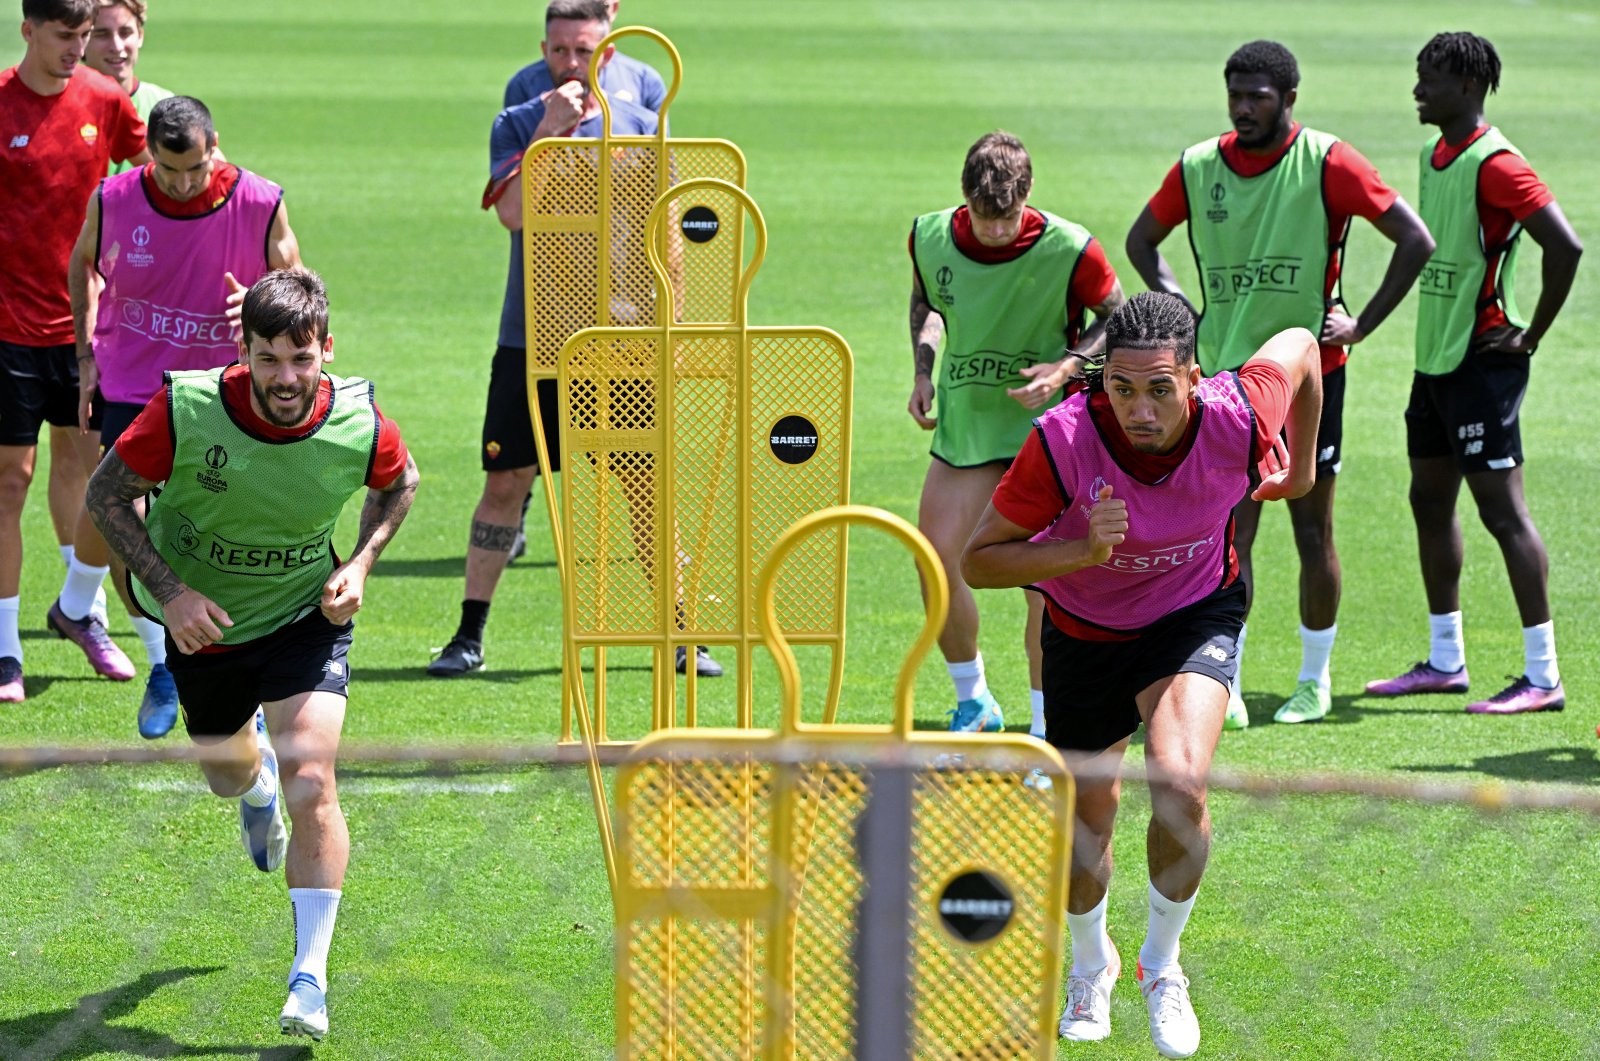 AS Roma players train ahead of the Europa Conference League final, Rome, Italy, May 24, 2022. (Reuters Photo)